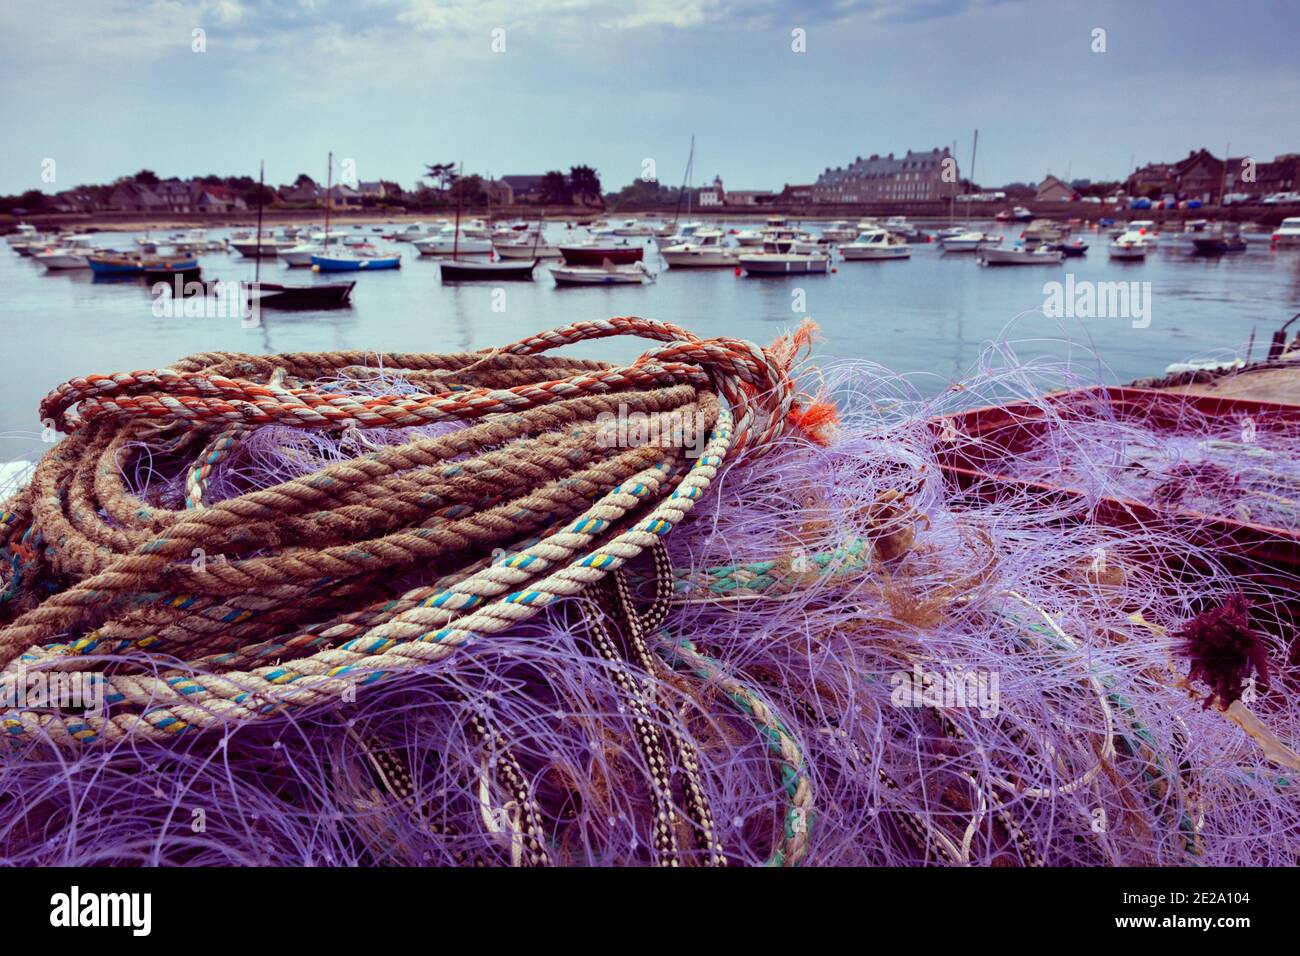 Normandy, France. Colorful fishing net drying on pier after